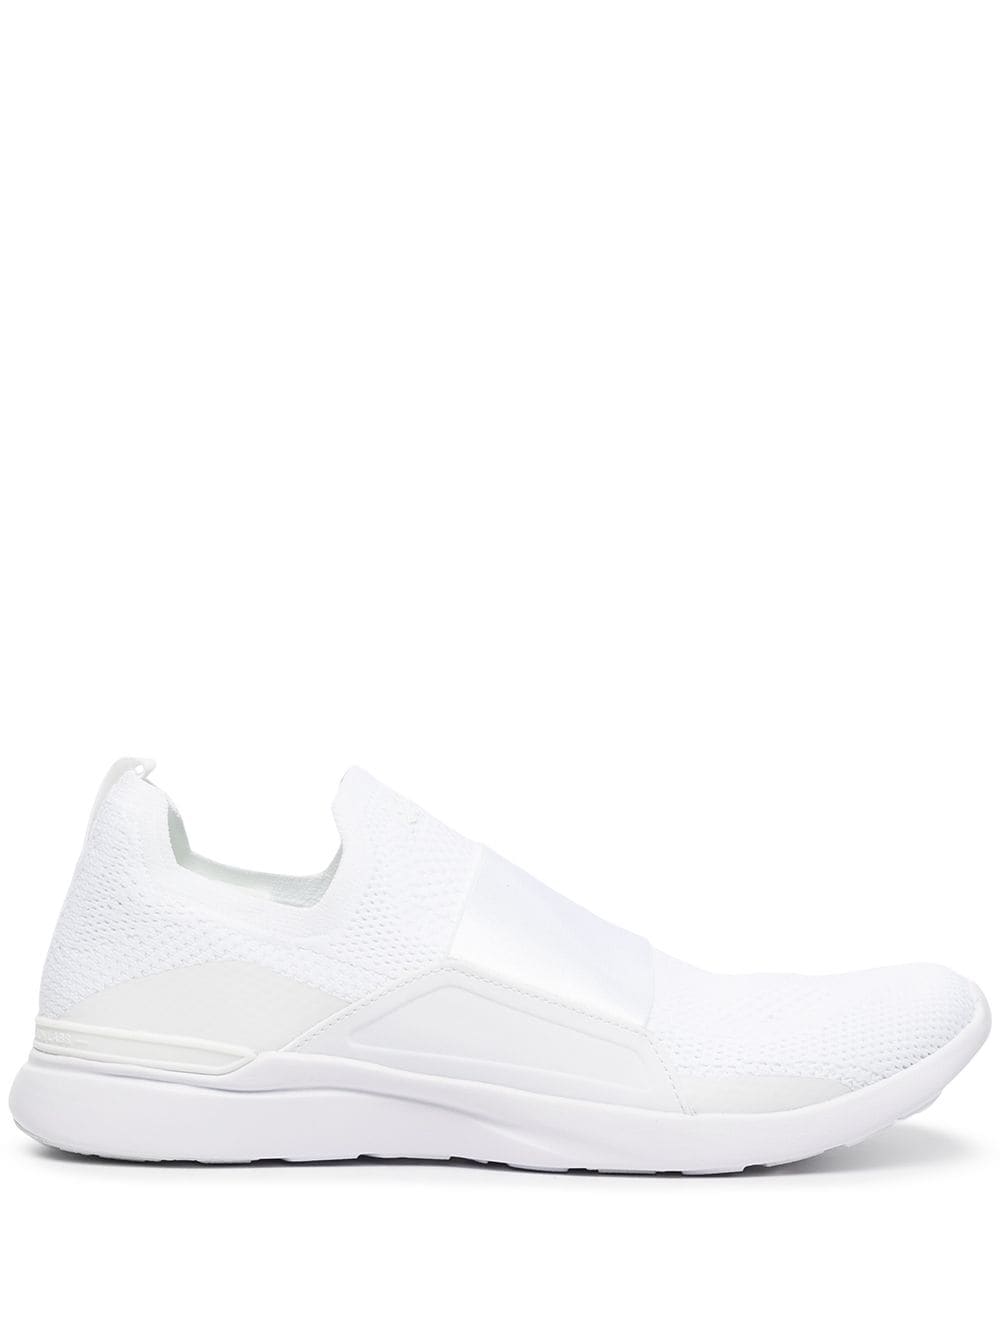 APL: ATHLETIC PROPULSION LABS Techloom Bliss low-top sneakers - White von APL: ATHLETIC PROPULSION LABS